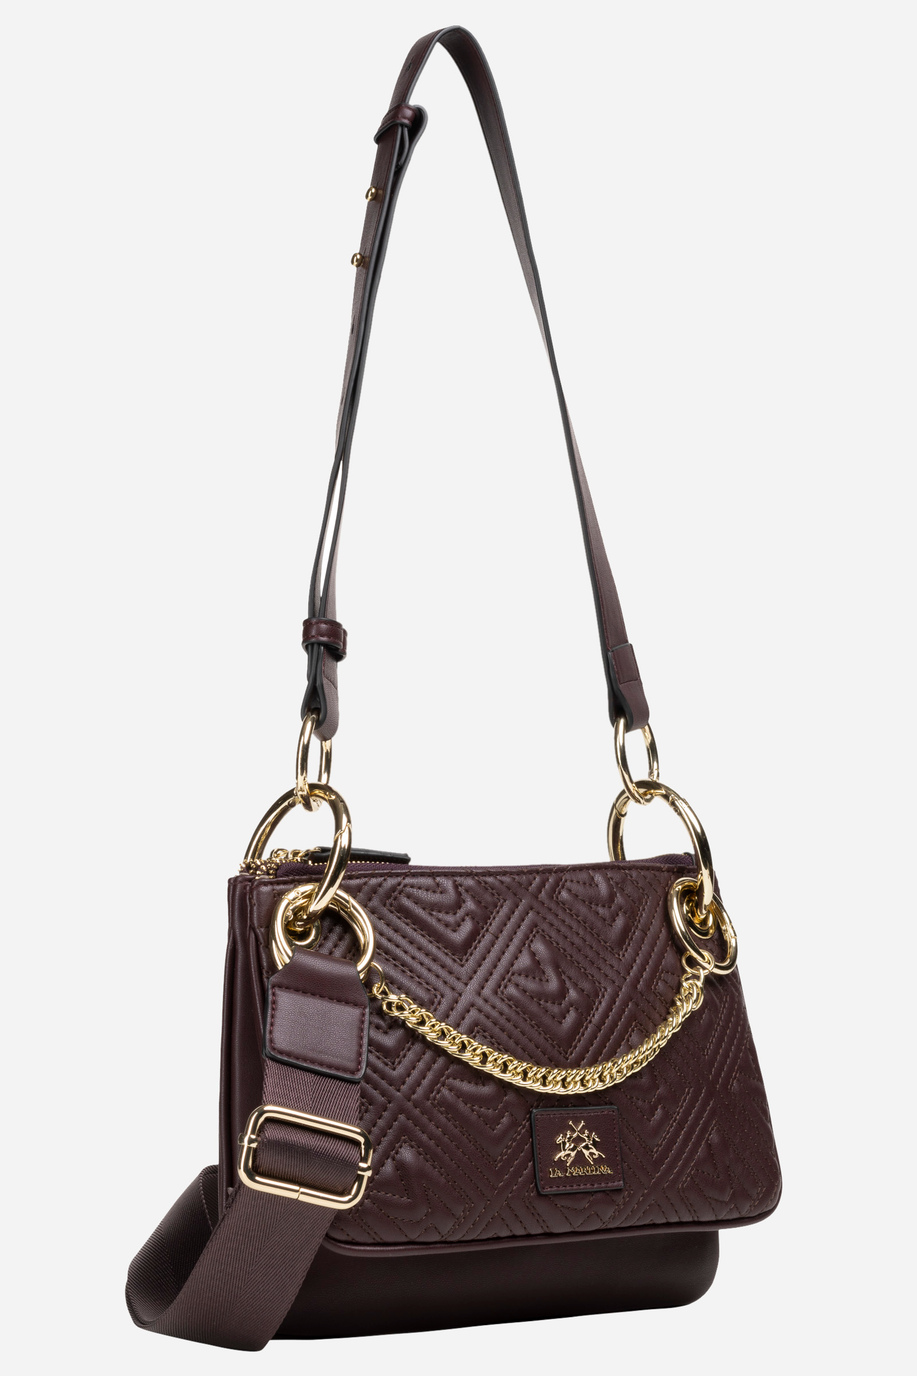 PU fabric shoulder bag with chain - Alice - Accessories for her | La Martina - Official Online Shop